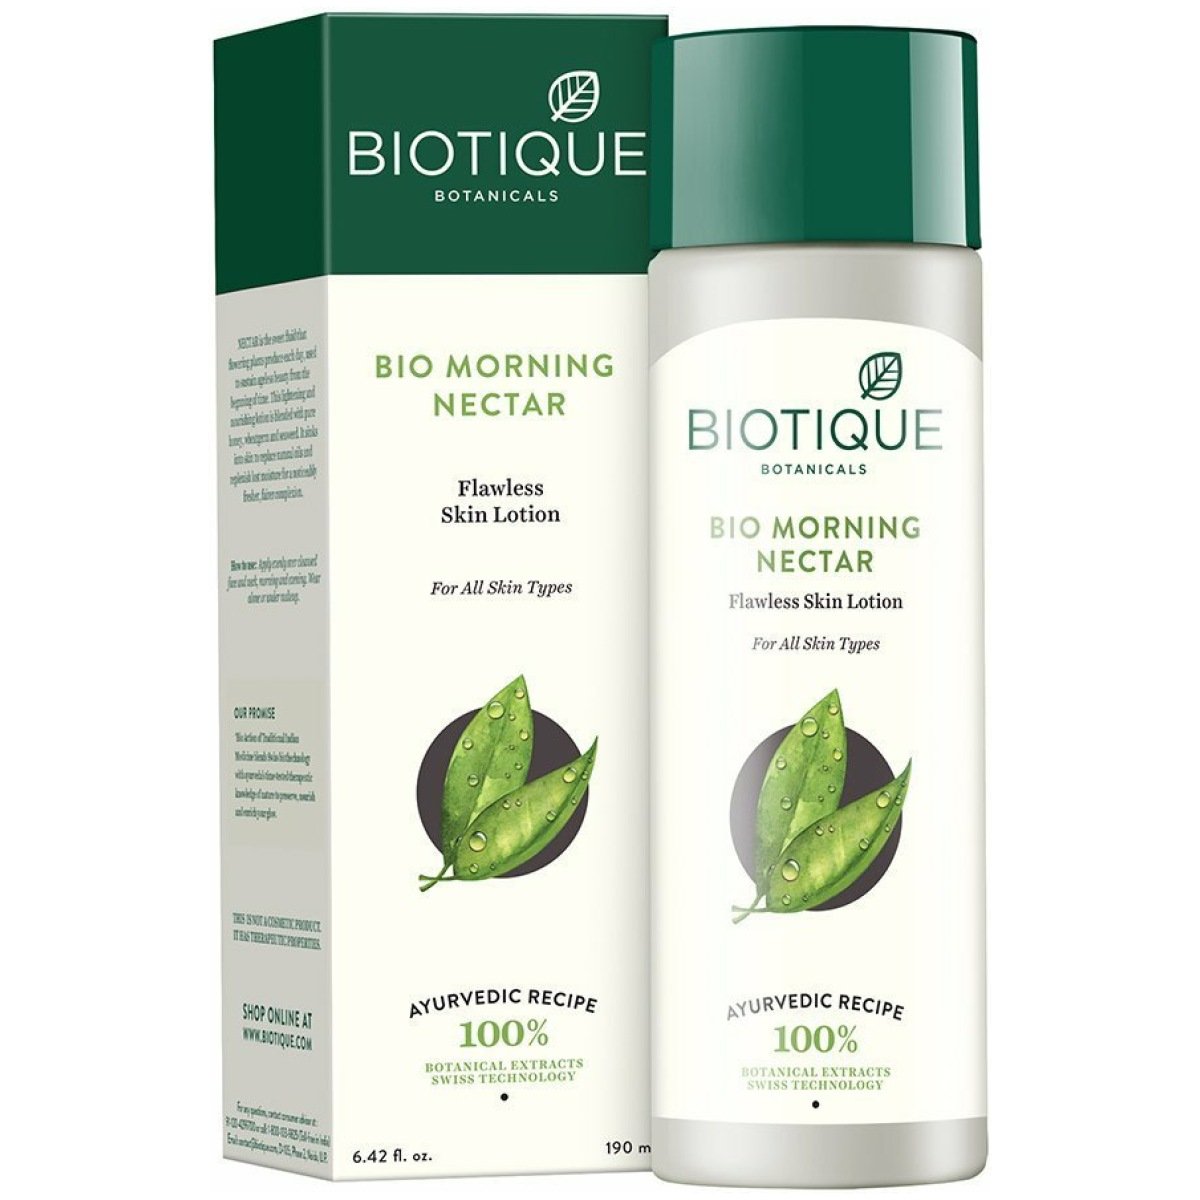 BIOTIQUE MORNING NECTAR SUNSCREEN LOTION 190G